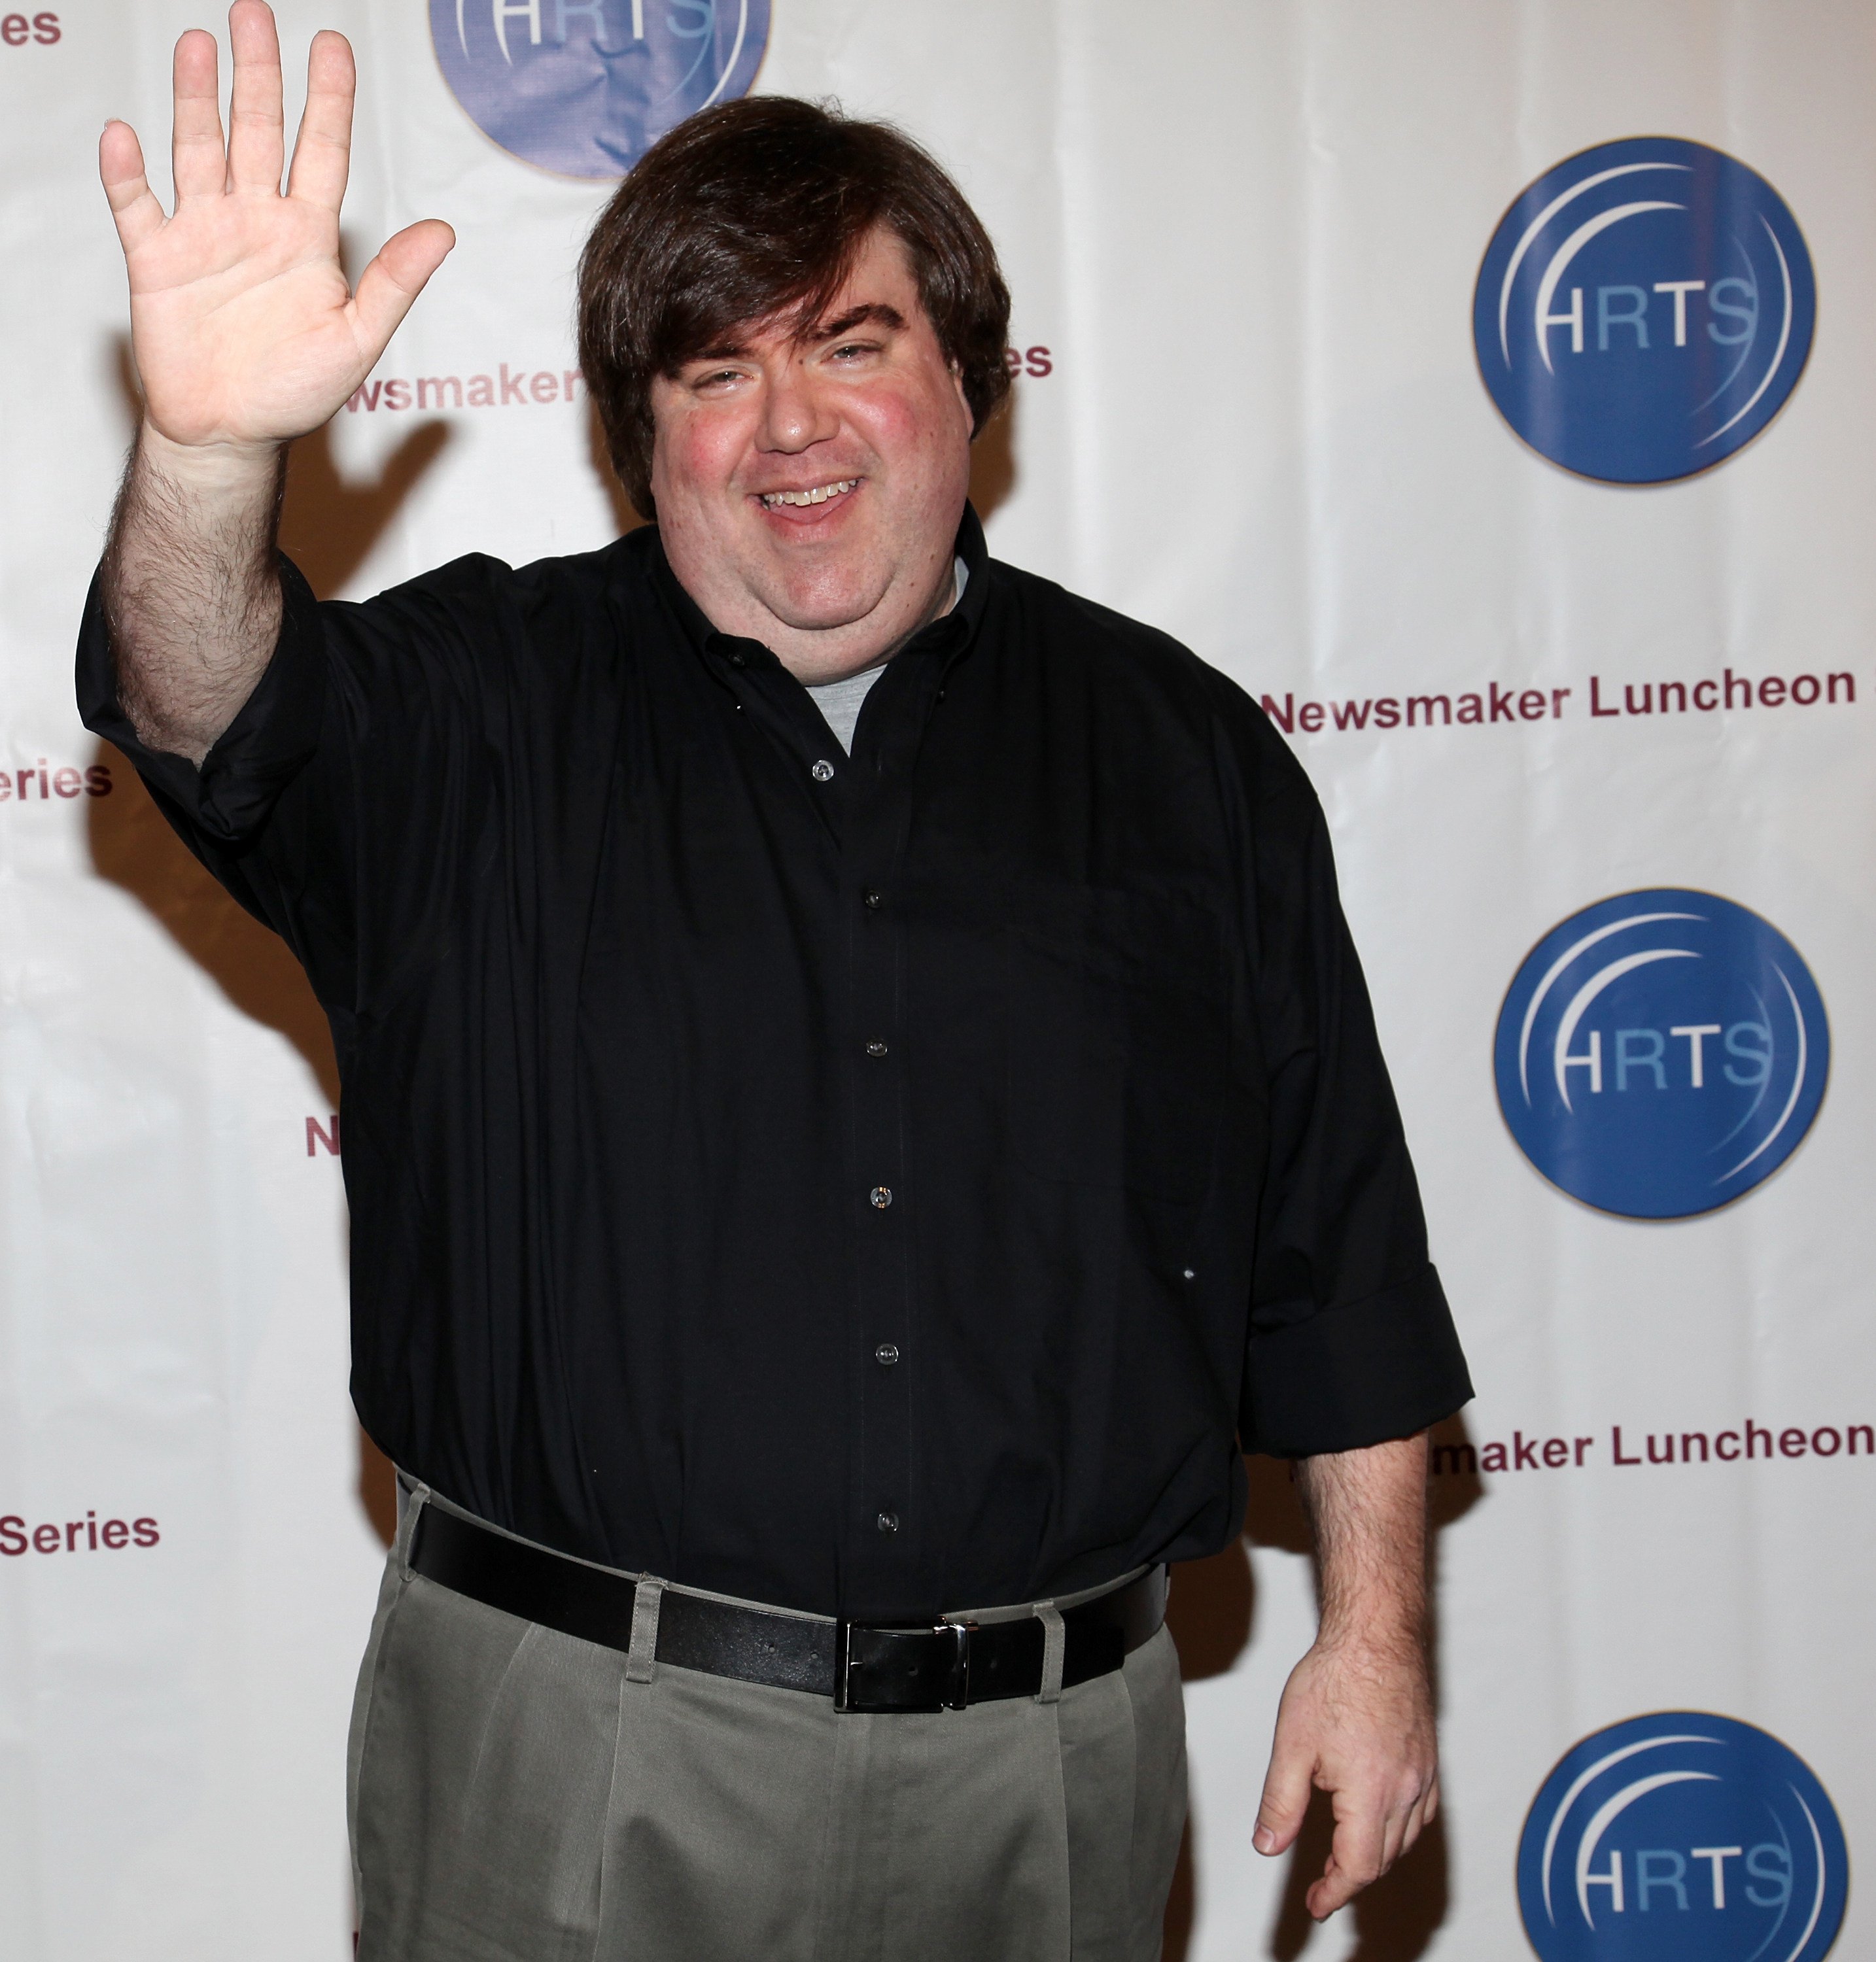 What are the allegations against Nickelodeon producer Dan Schneider? Photo: Getty Images